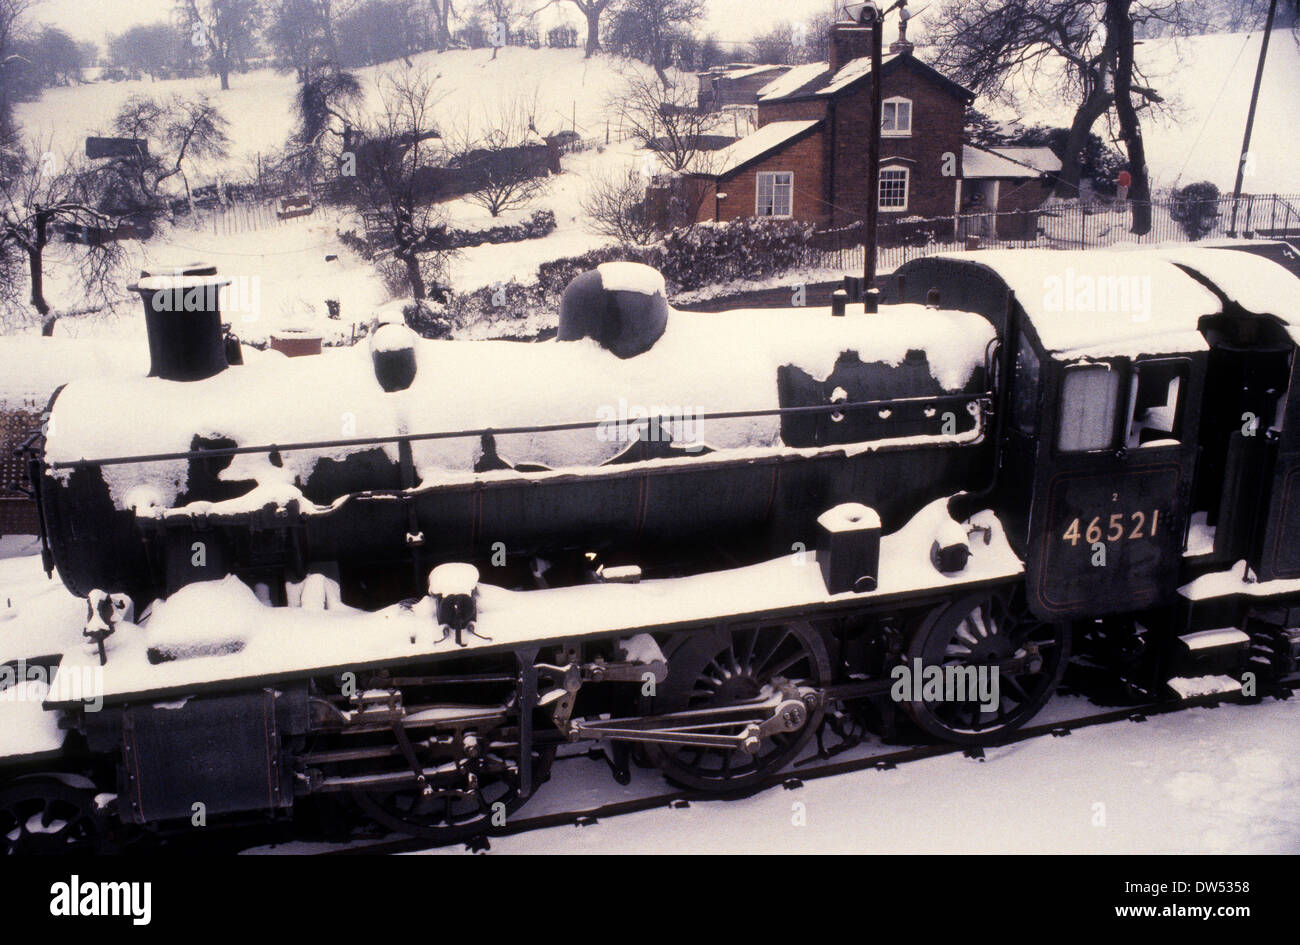 Severn Valley Railway in Bridgnorth during the winter freeze of 1981/82 Stock Photo